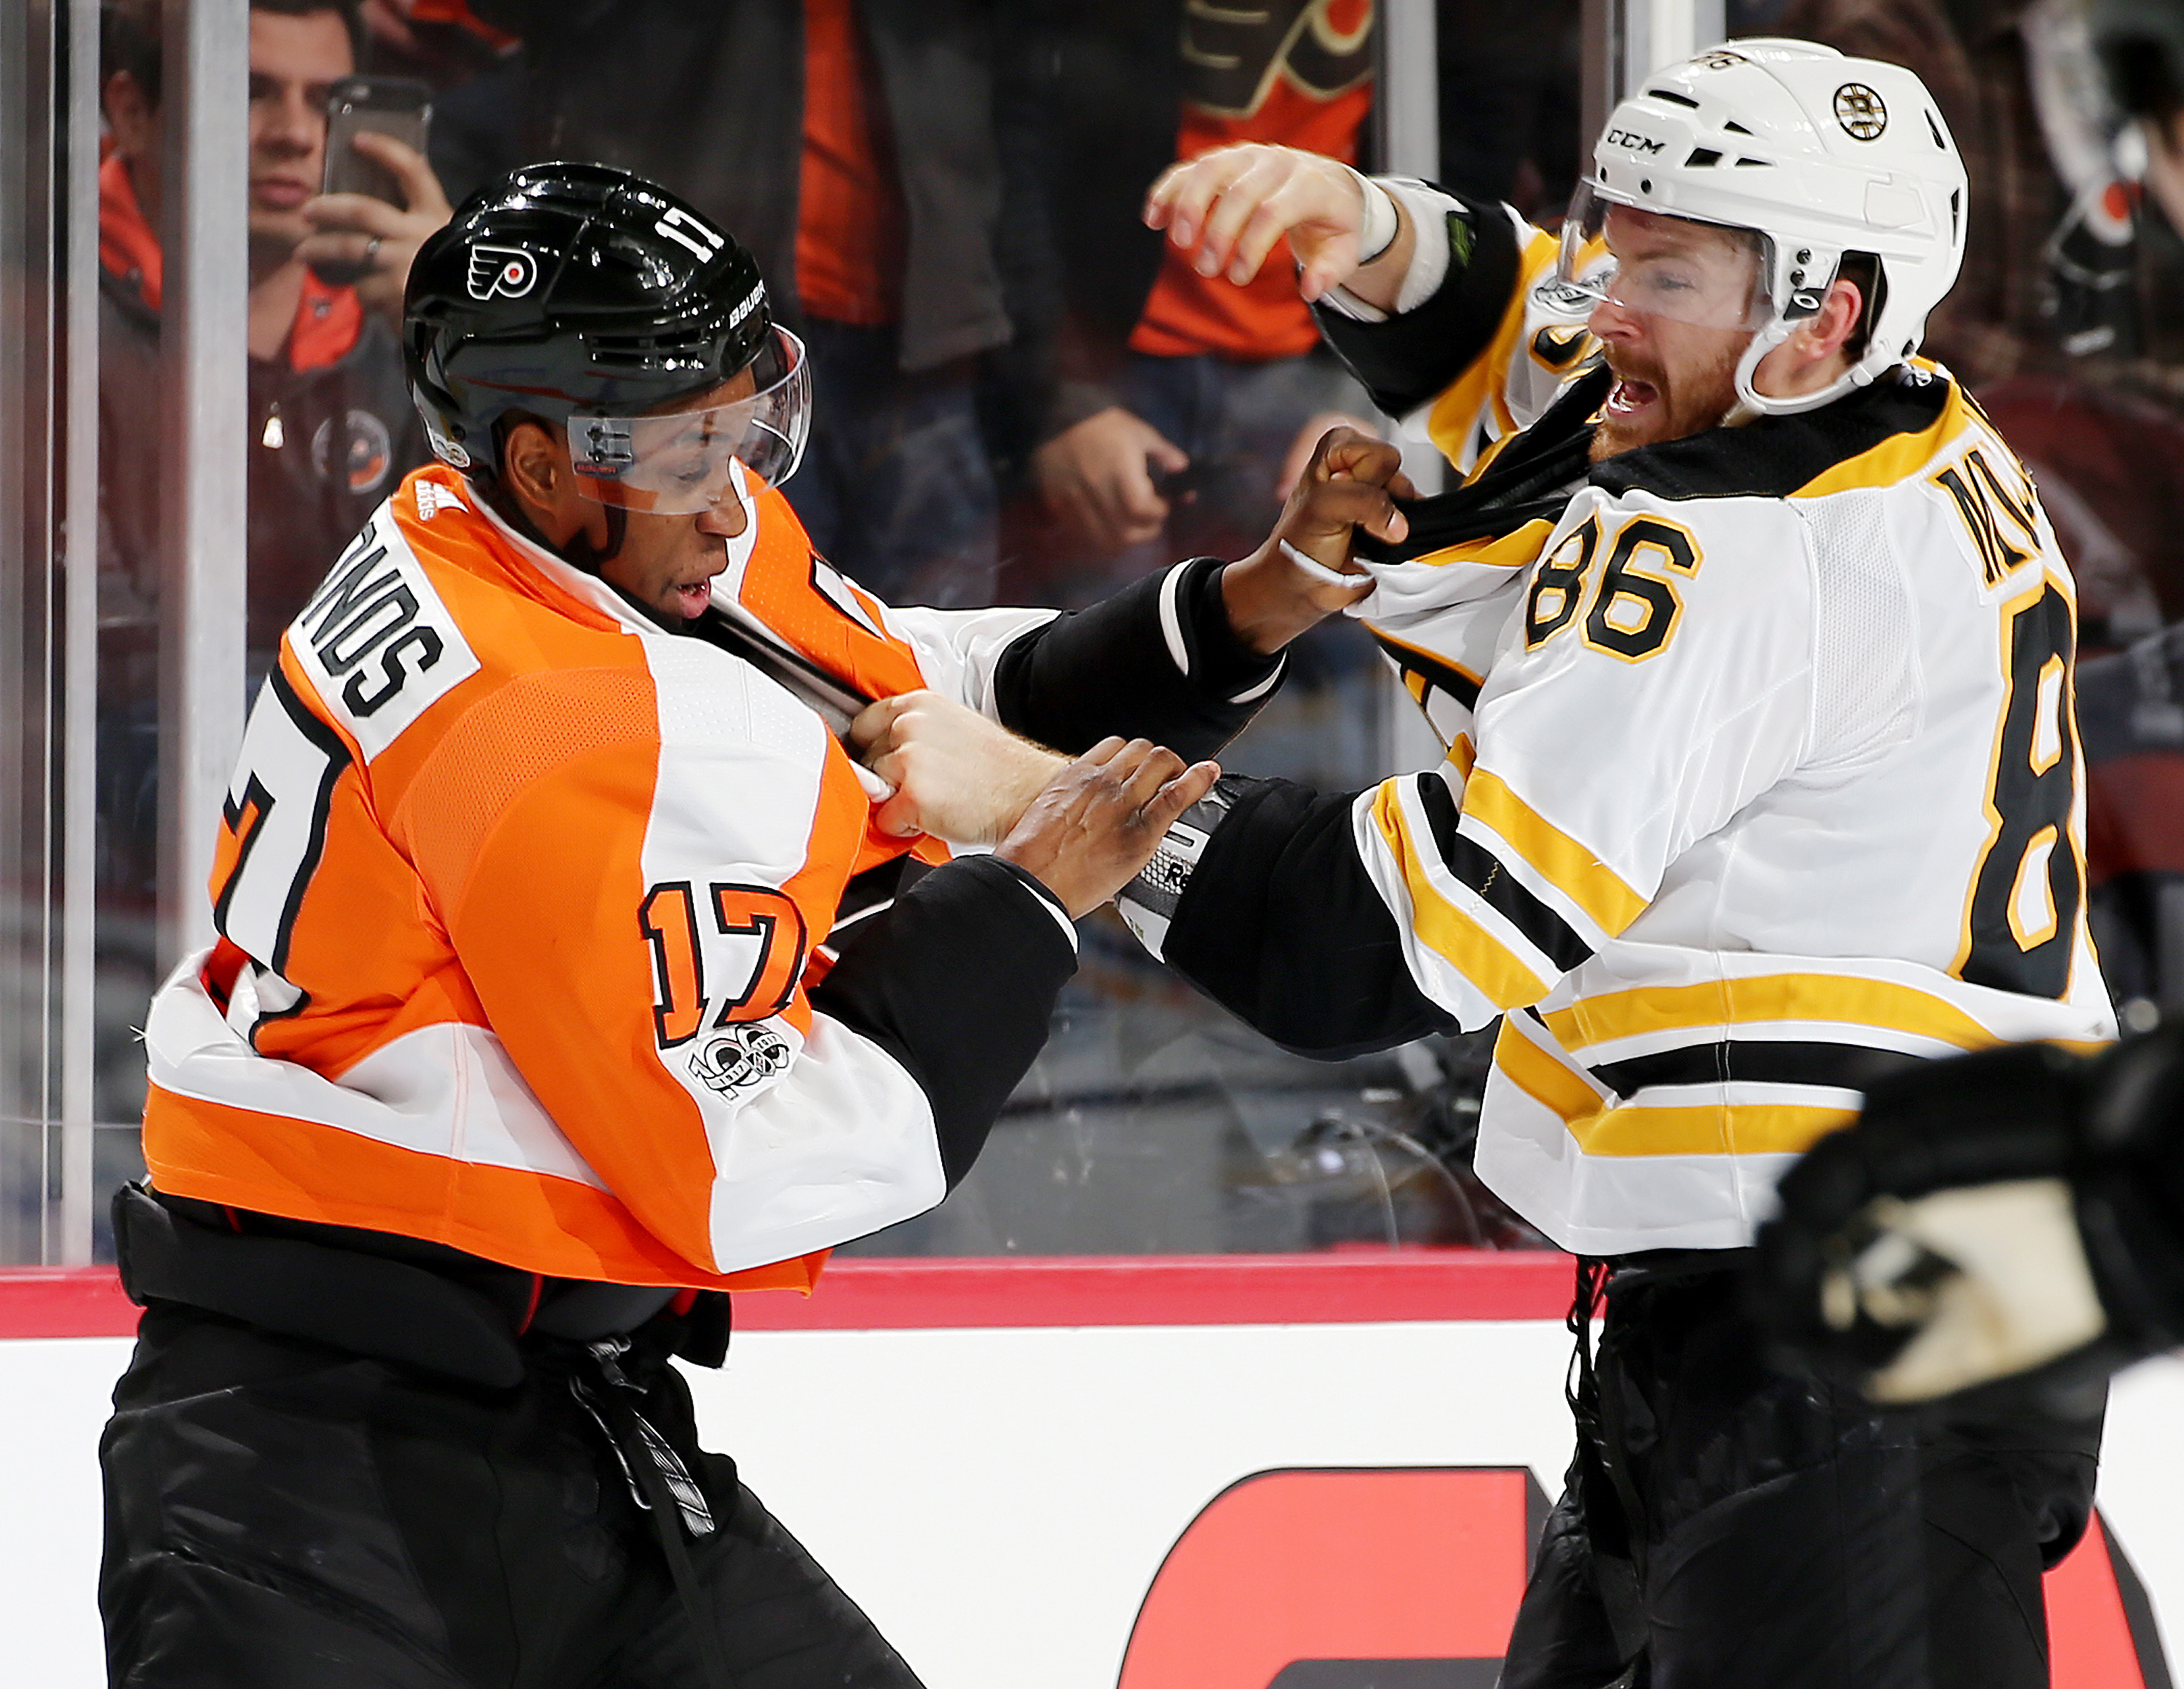 Bruins' A.J. Greer 'Couldn't Say No' To Fight With Wayne Simmonds